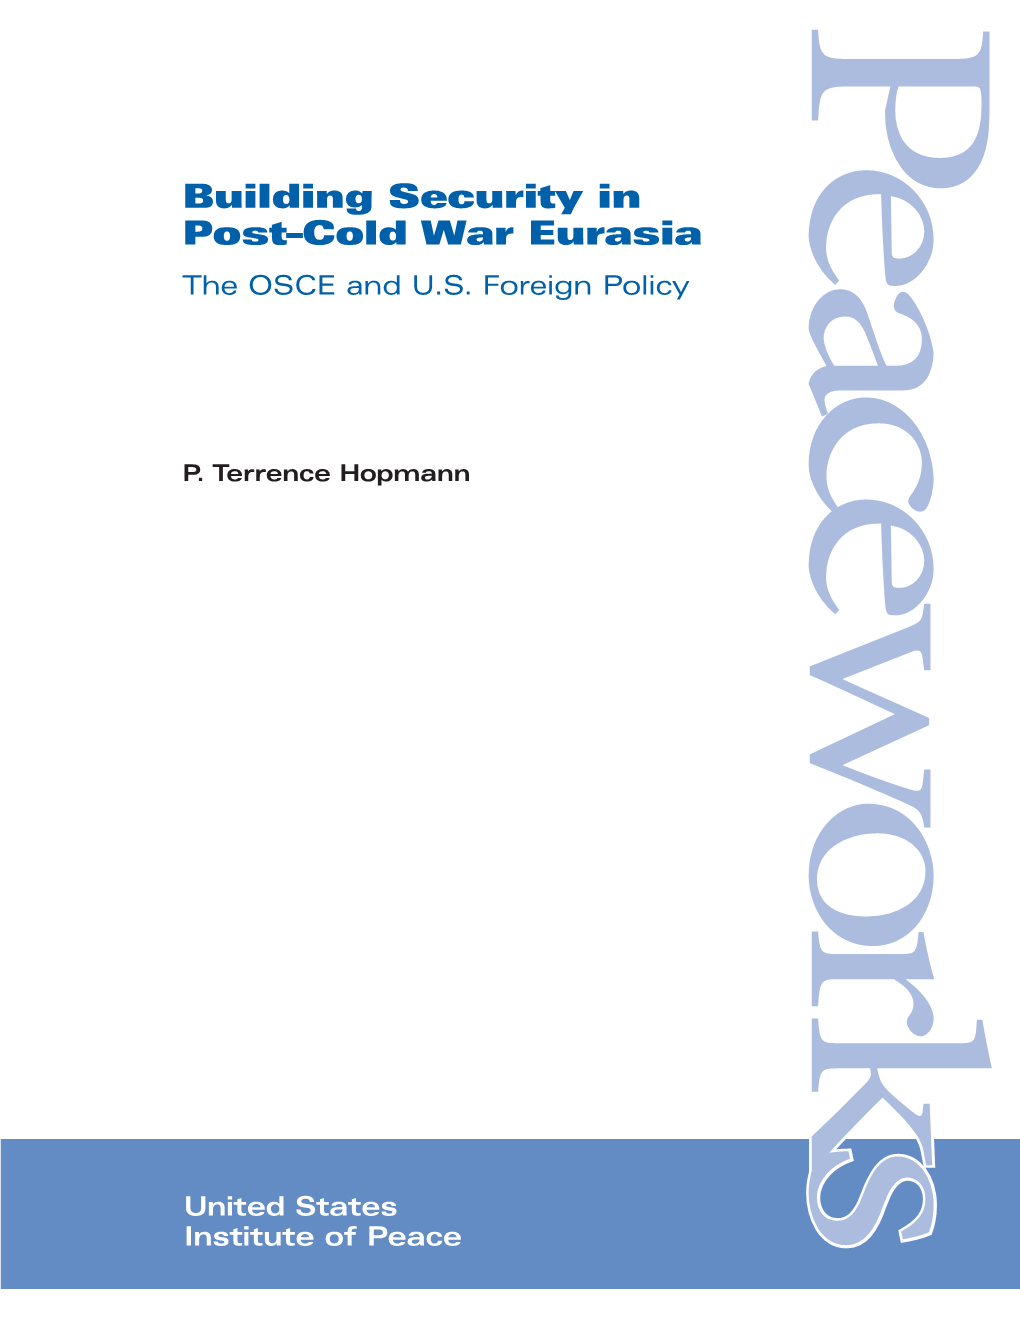 Building Security in Post-Cold War Eurasia